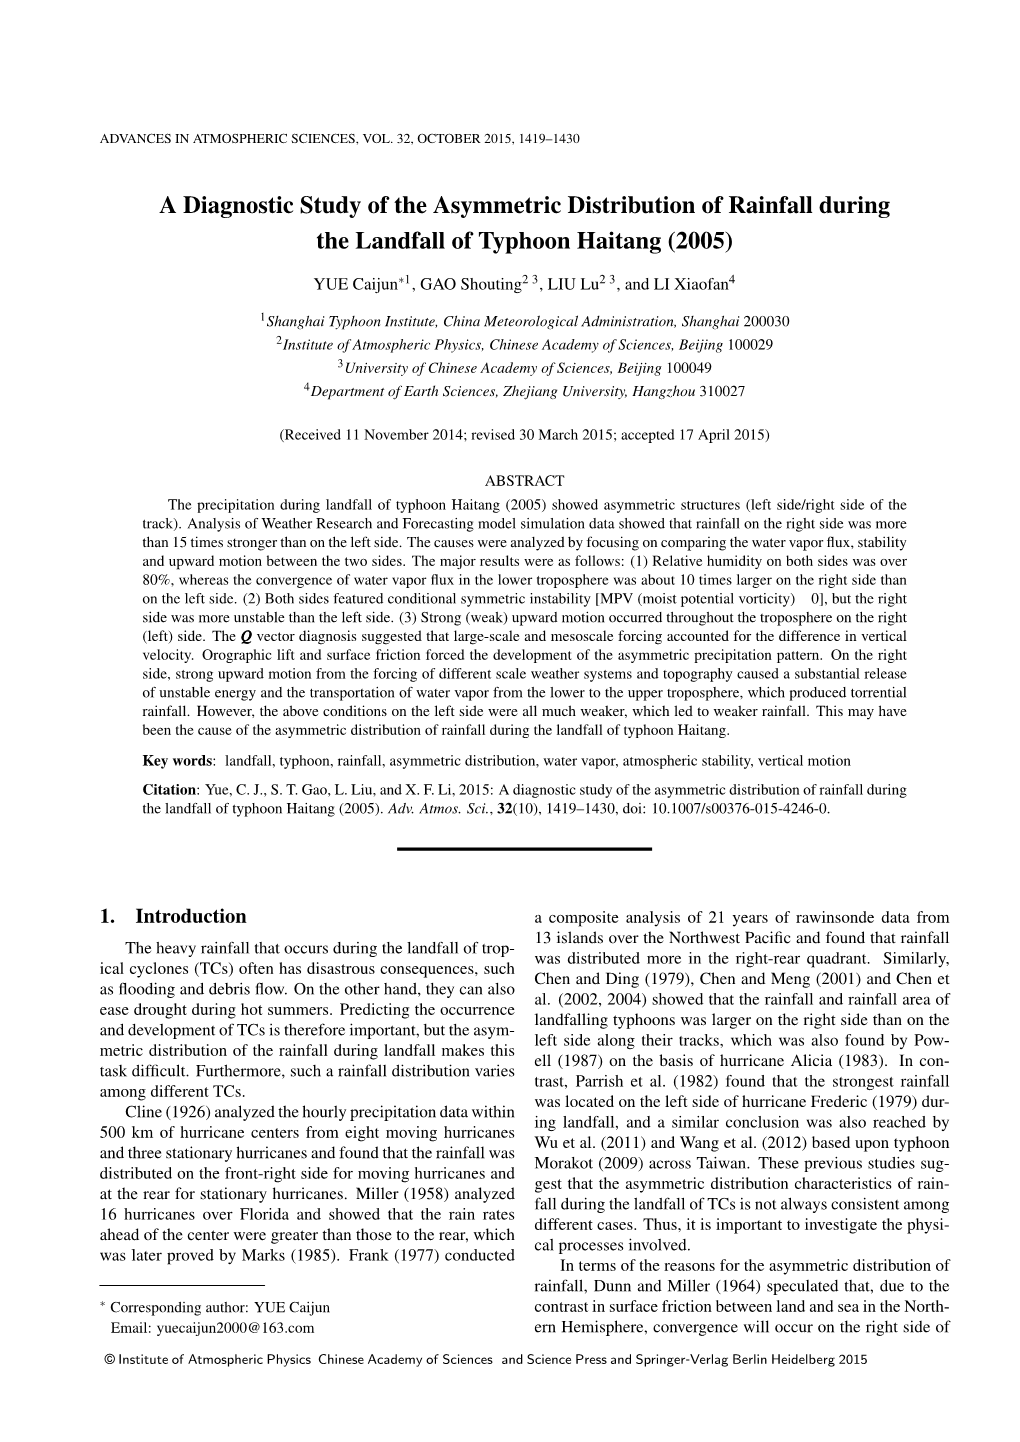 A Diagnostic Study of the Asymmetric Distribution of Rainfall During the Landfall of Typhoon Haitang (2005)